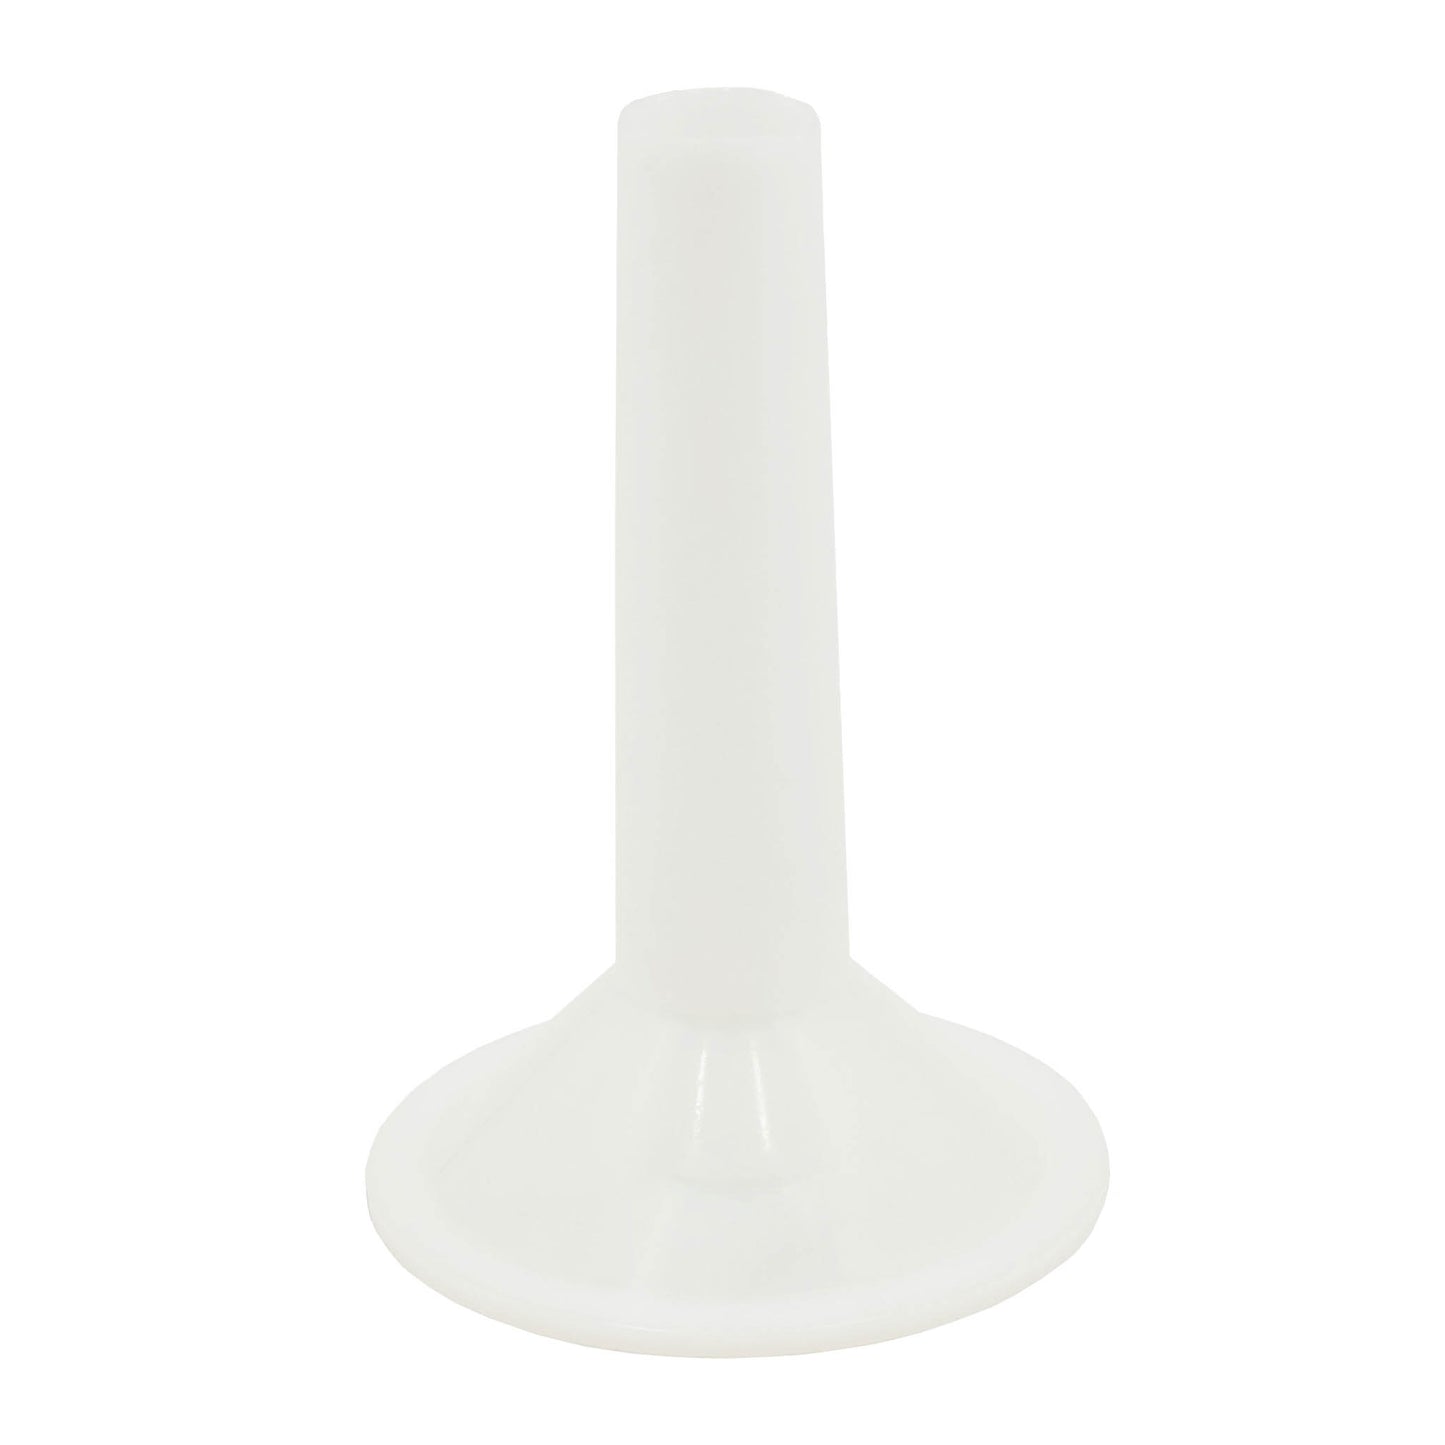 white food grade plastic salami and sausage mincer funnel for size 22 mincers 25mm in diameter.